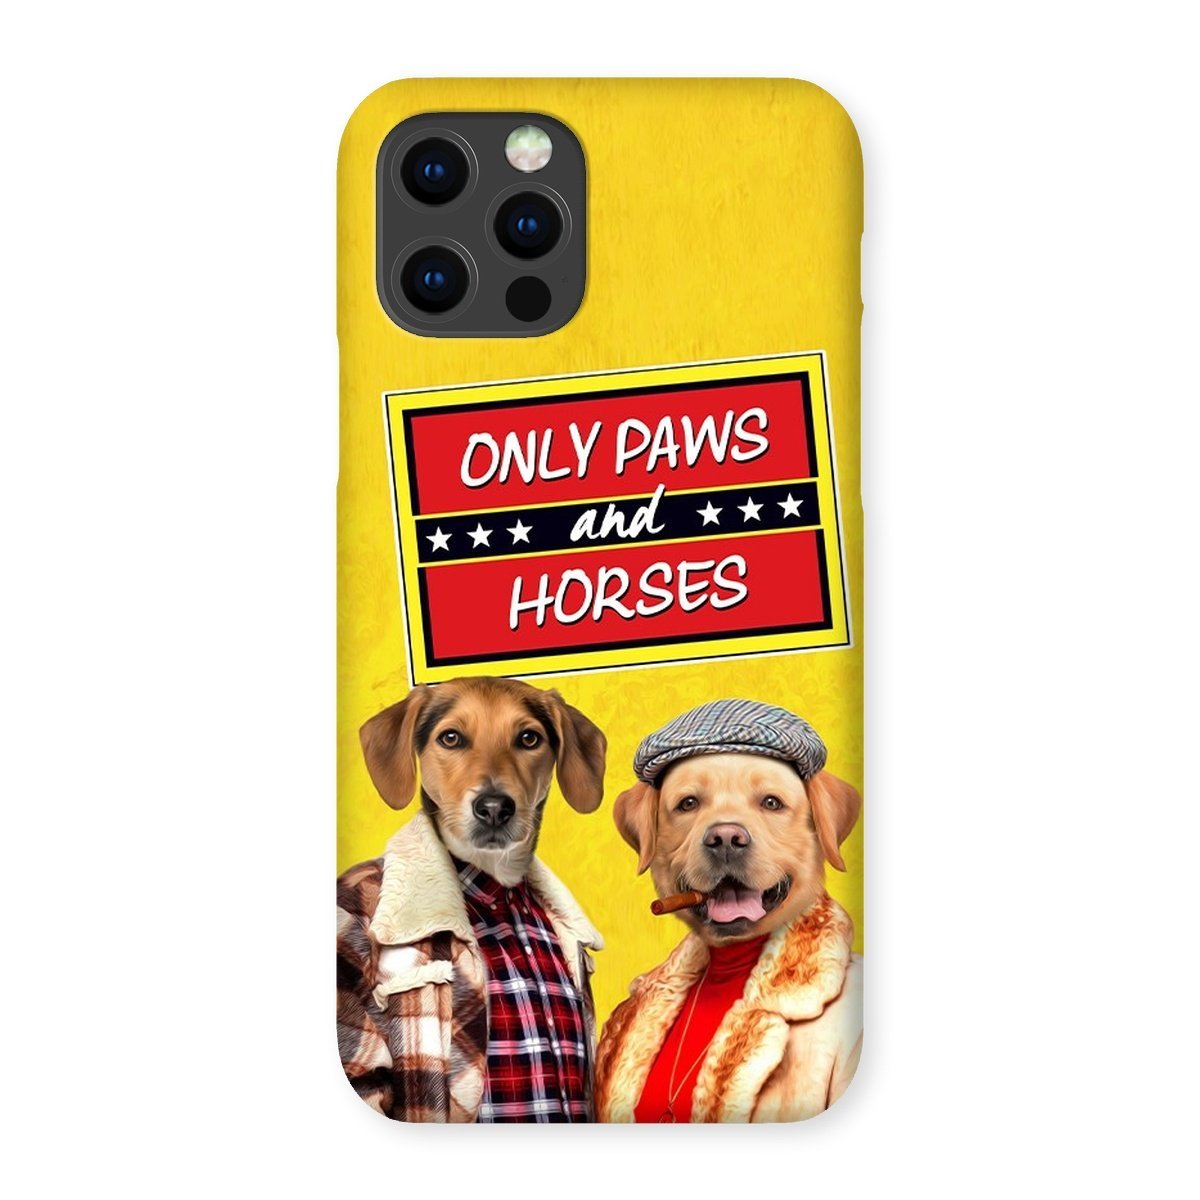 Only Paws & Horses: Custom 2 Pet Phone Case - Paw & Glory - paw and glory, dog and owner phone case, personalised dog phone case, personalized puppy phone case, personalised iphone 11 case dogs, pet portrait phone case, personalized dog phone case, Pet Portrait phone case,